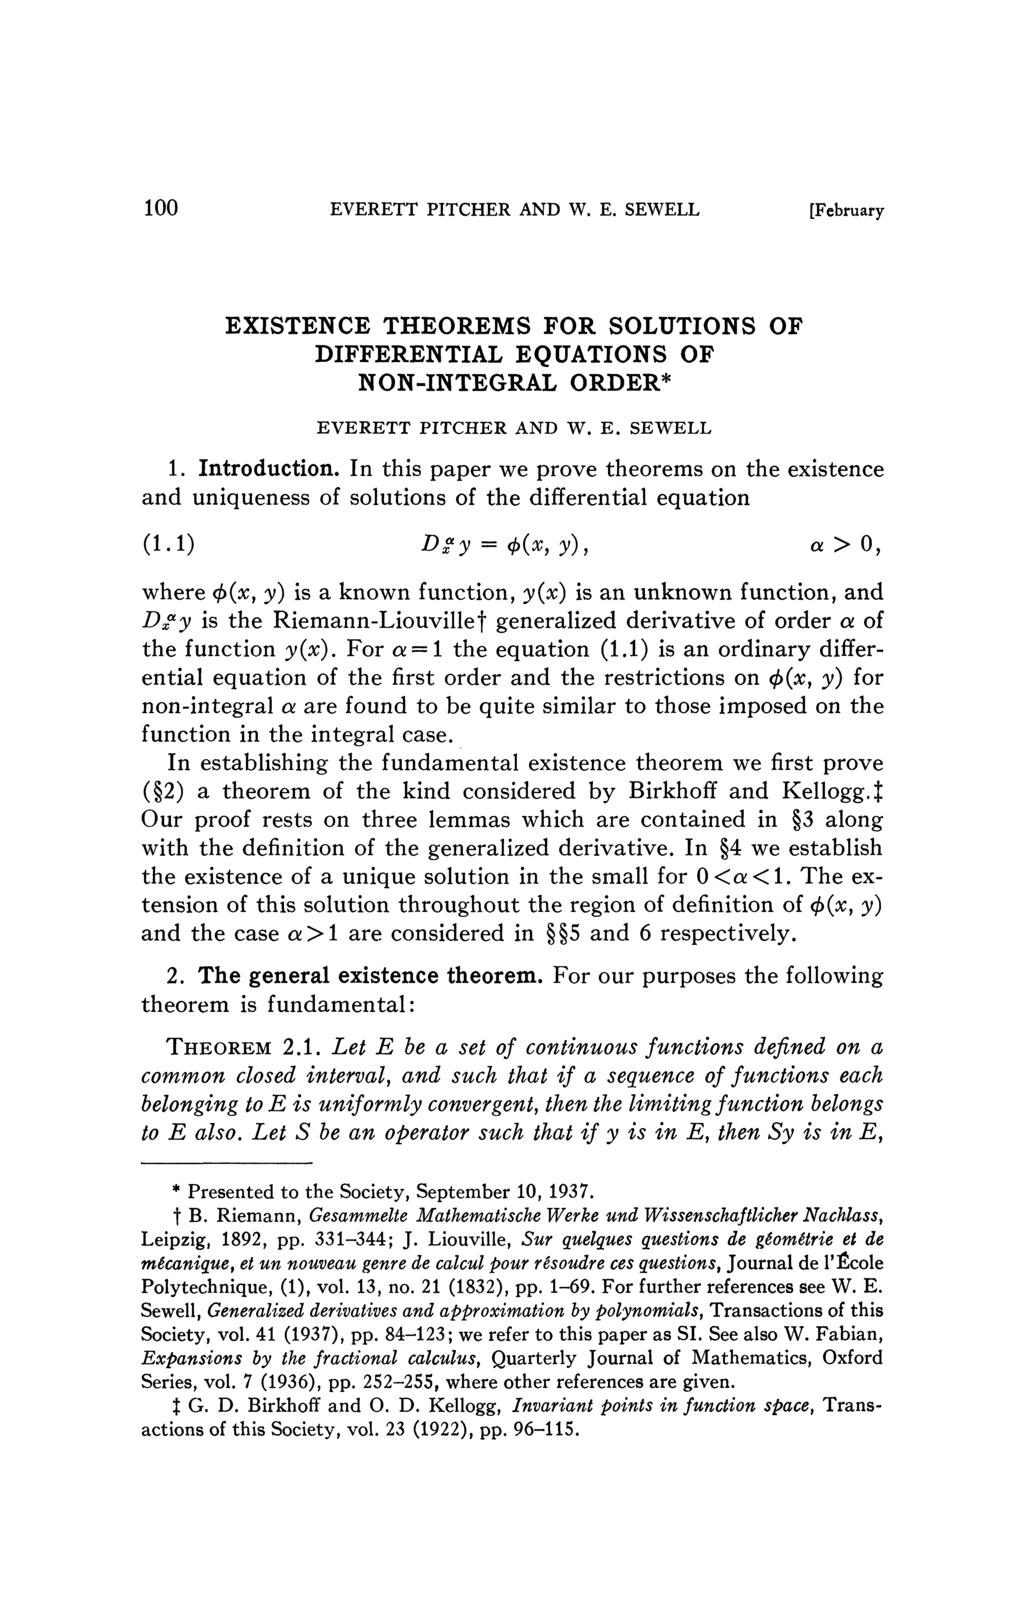 100 EVERETT PITCHER AND W. E. SEWELL [February EXISTENCE THEOREMS FOR SOLUTIONS OF DIFFERENTIAL EQUATIONS OF NON-INTEGRAL ORDER* EVERETT PITCHER AND W. E. SEWELL 1. Introduction.